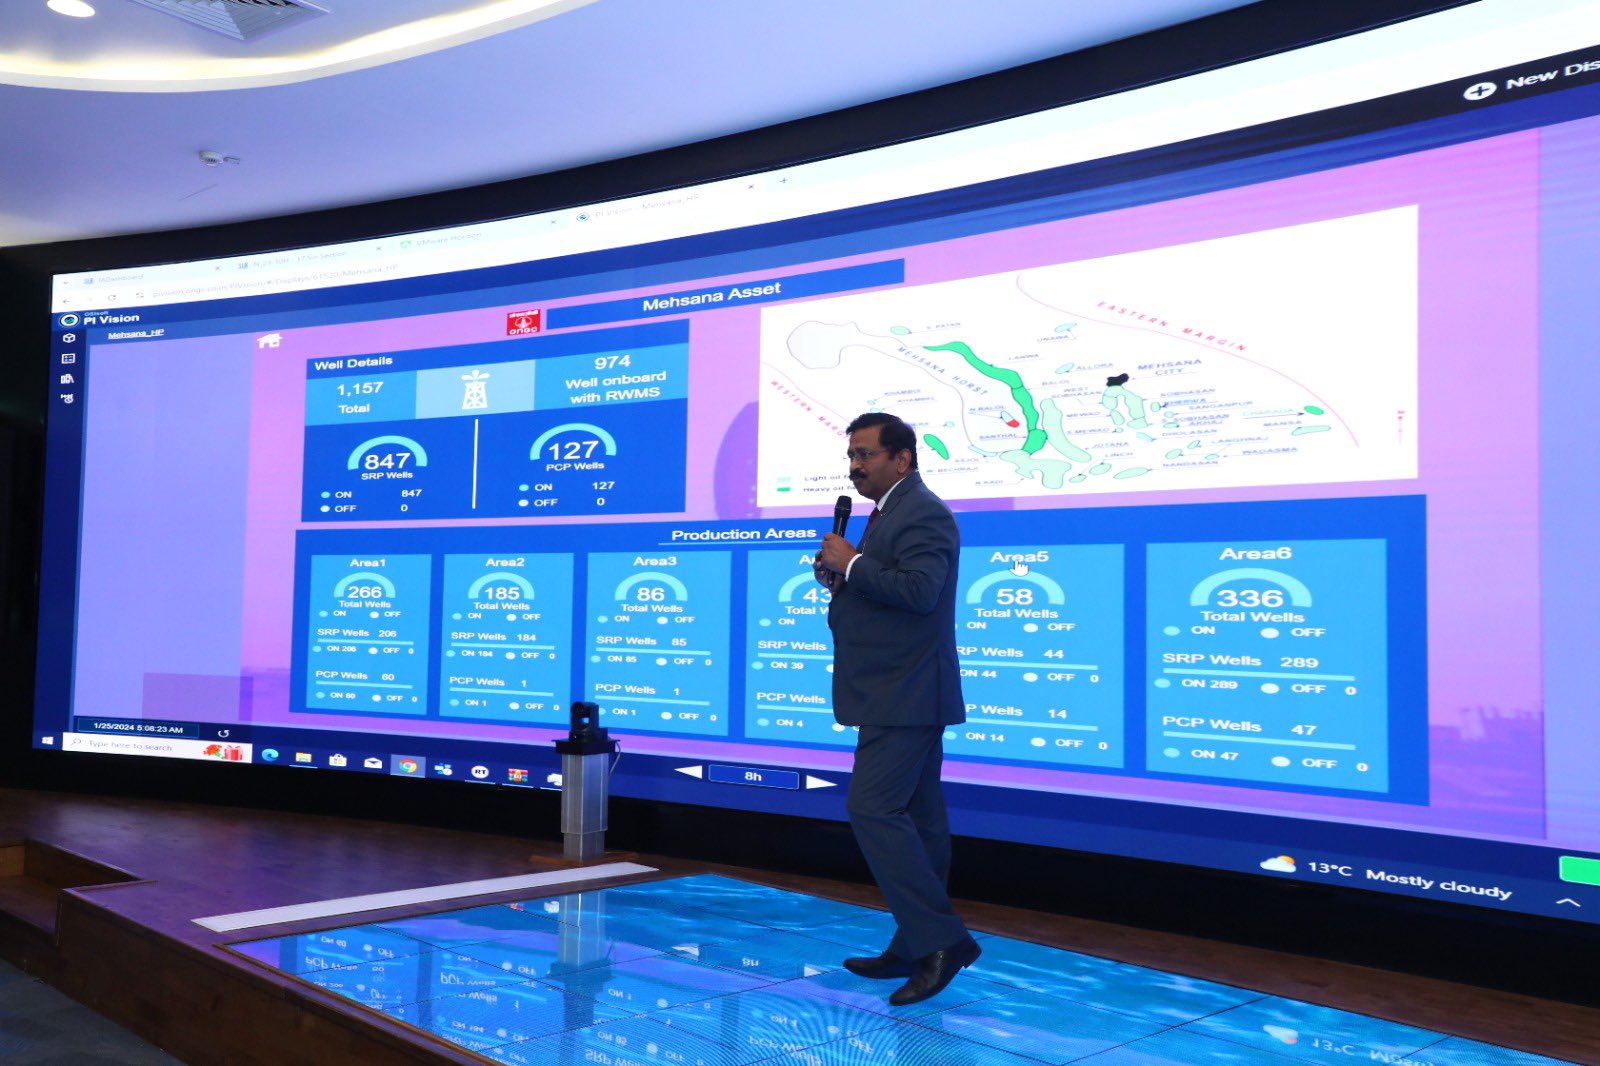 T1V-ONGC-Digital-Corporate-Visualization-Center-Delhi-India-ThinkHub-62ft-curved-LED-touchwall-1